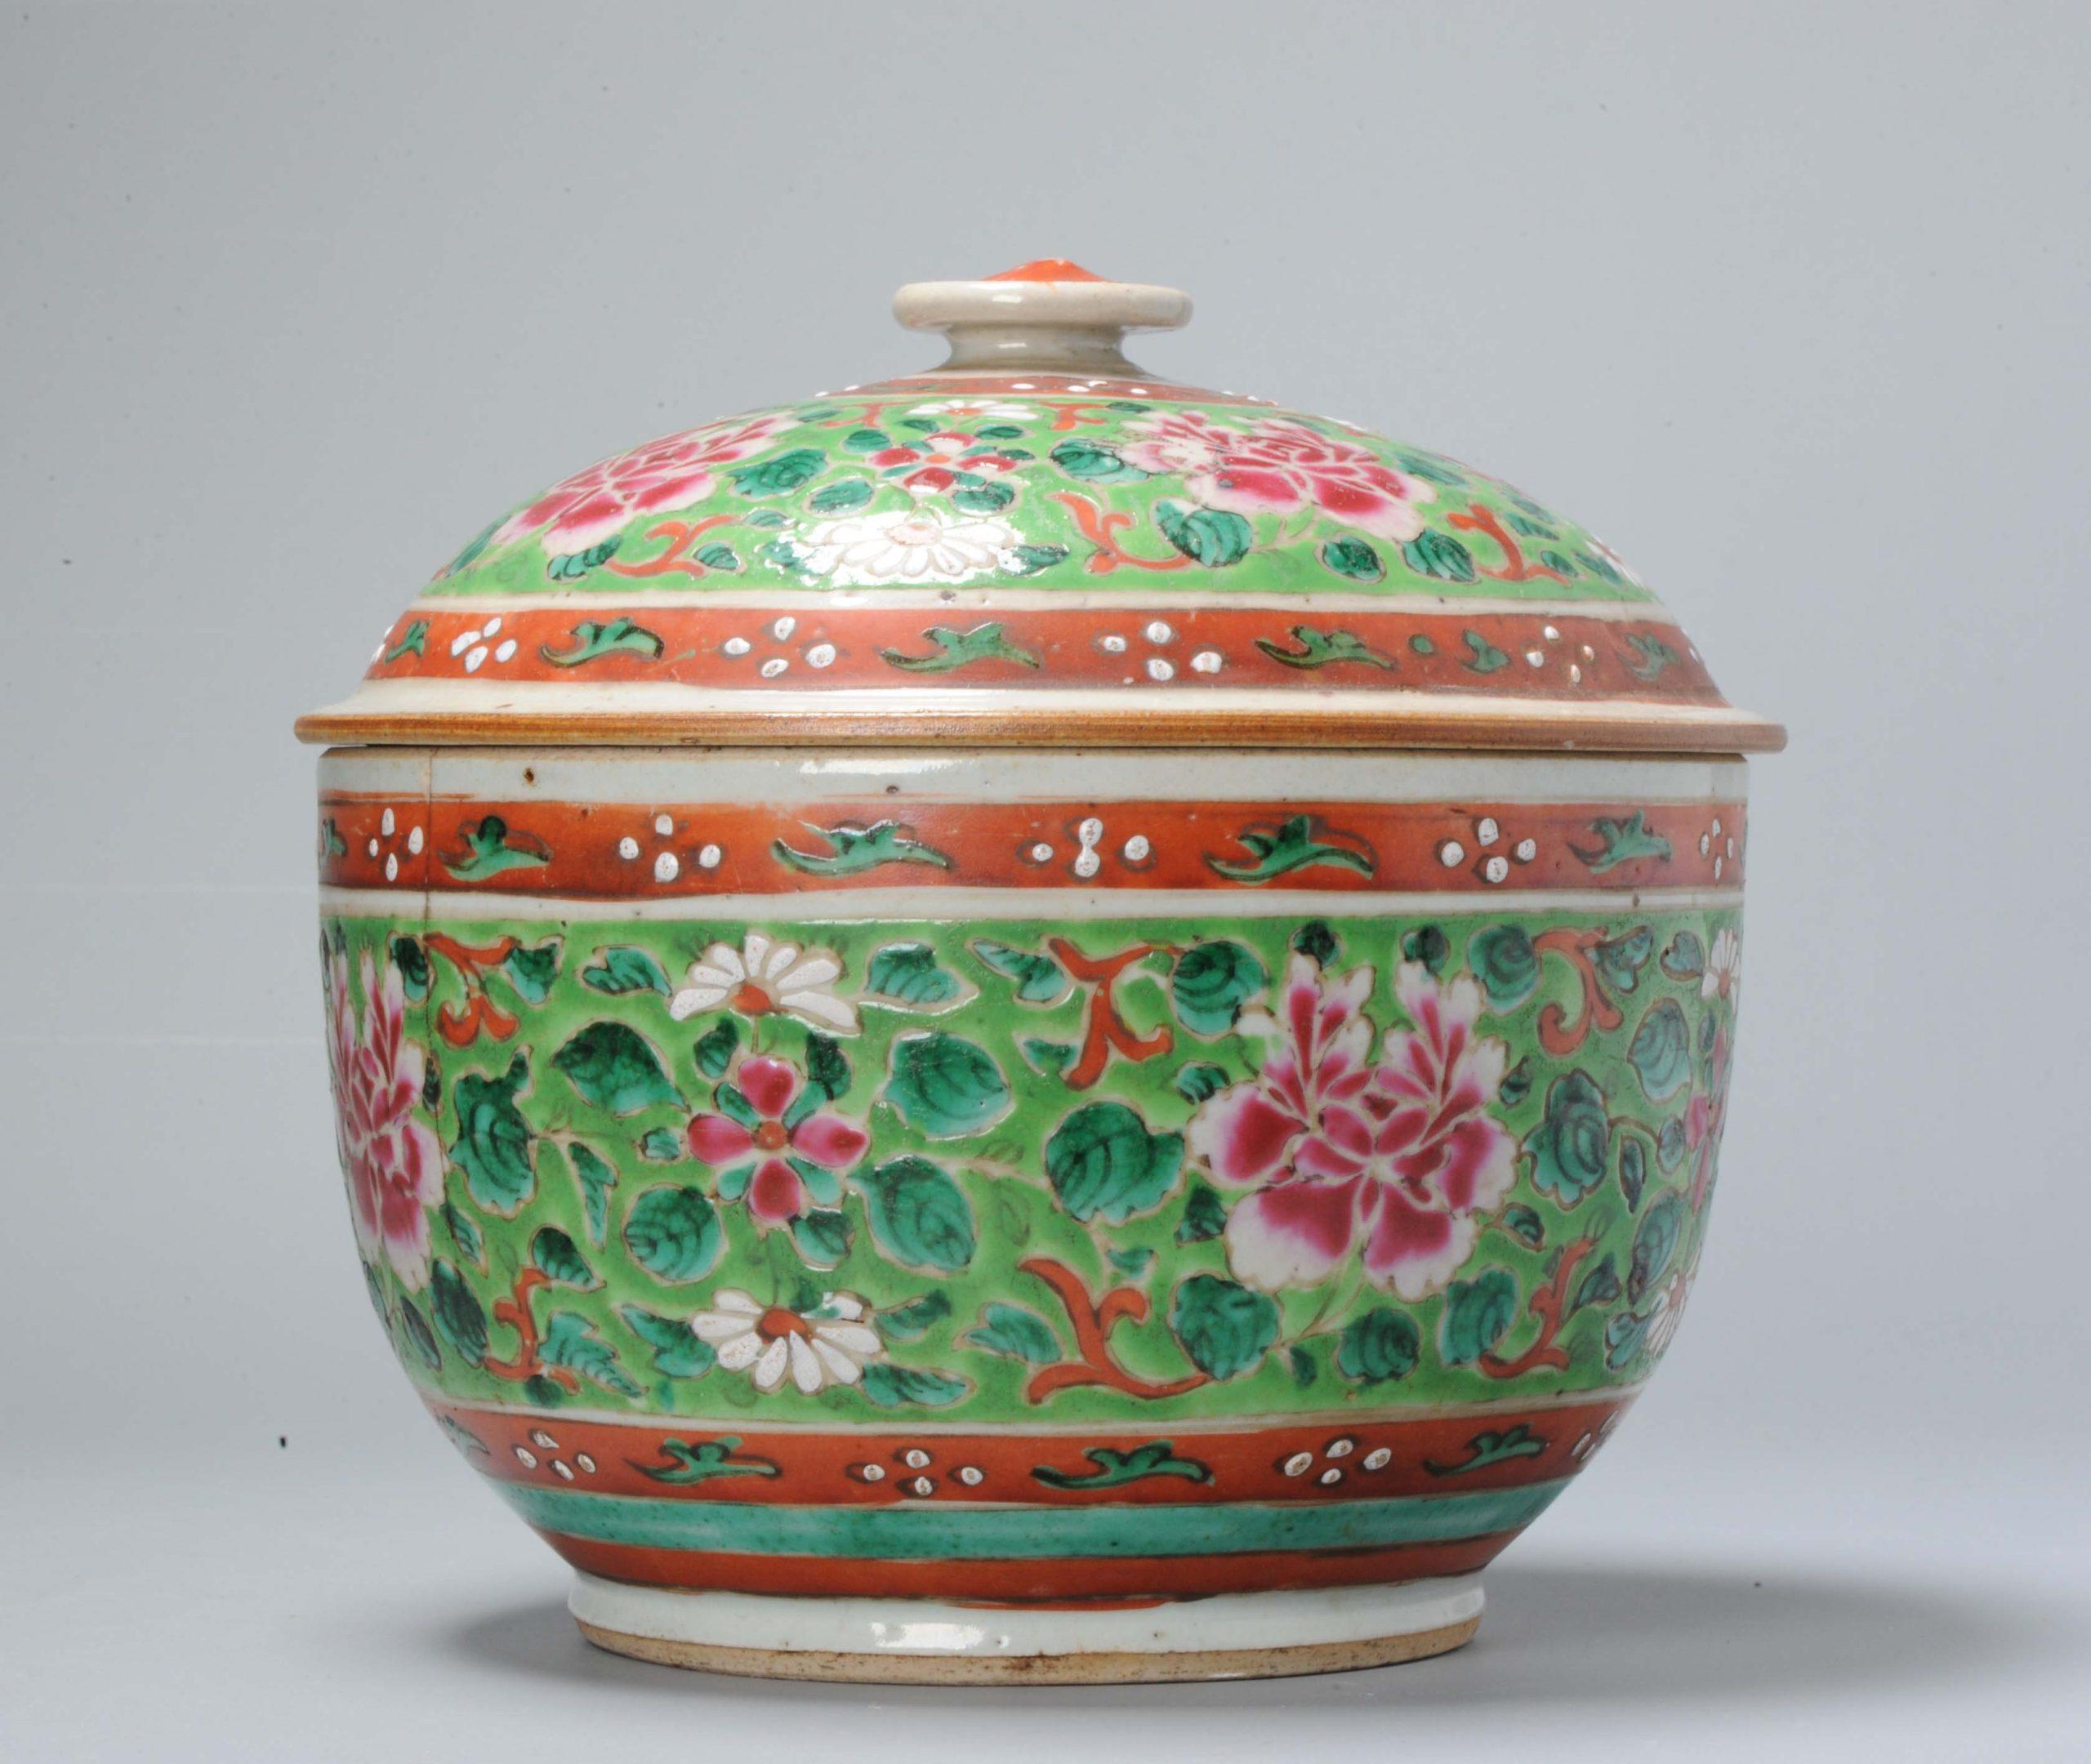 Description

Lovely Chinese porcelain bencharong jar

When Bencharong (Benjarong) is used to refer to porcelain it usually means a type of 18th and 19th centuries Chinese polychrome enameled 'five colored' wares, made in Jingdezhen to Thai